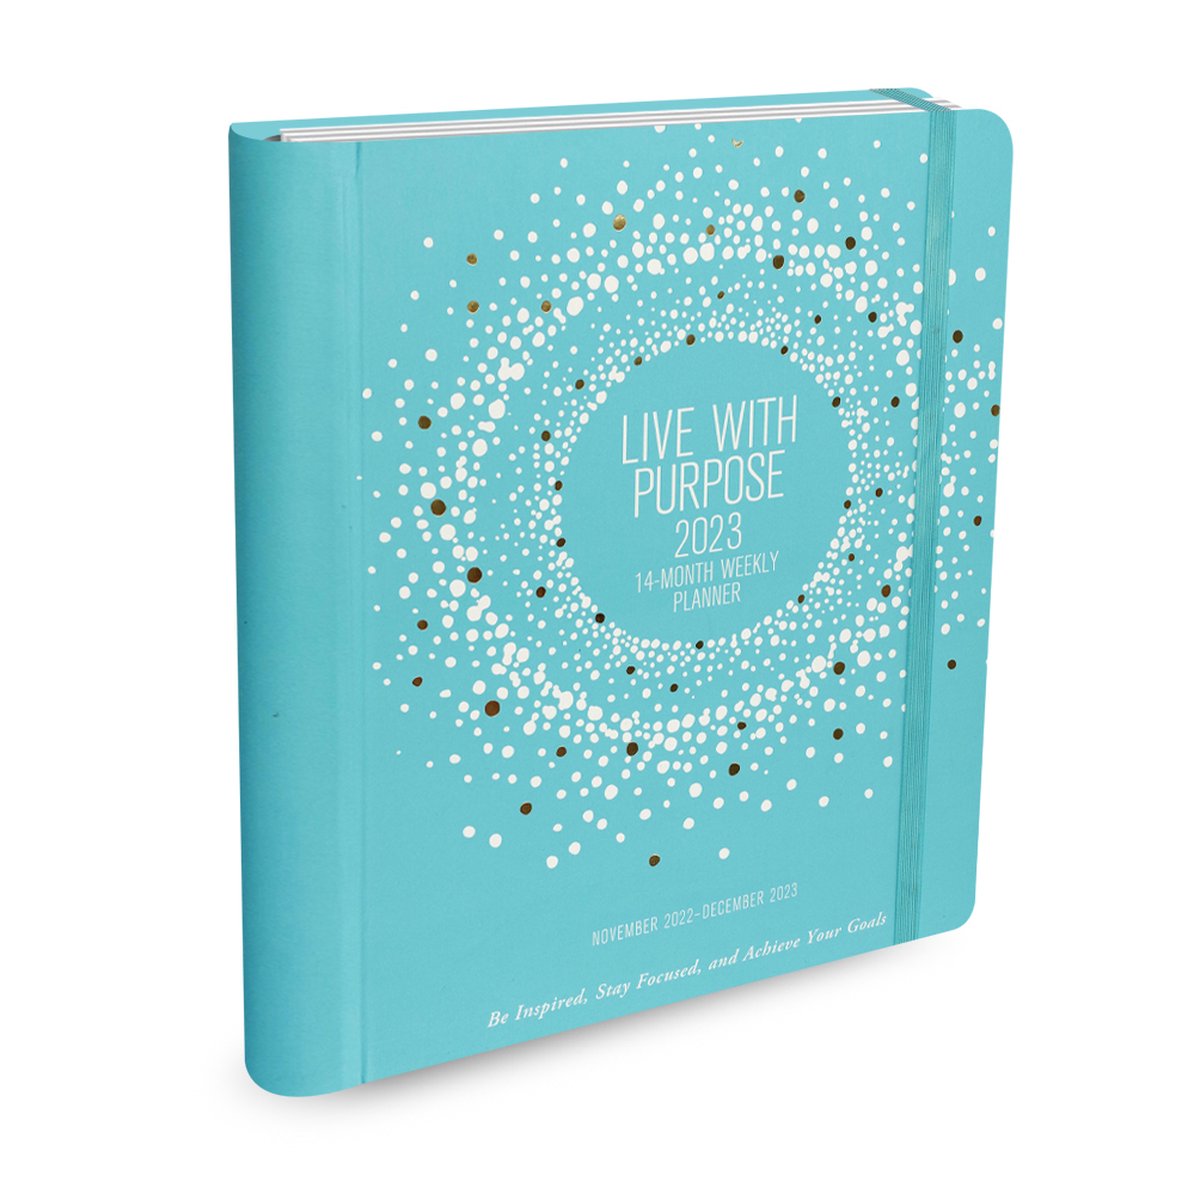 2023 Live with Purpose Planner (Weekly Goal Planner)